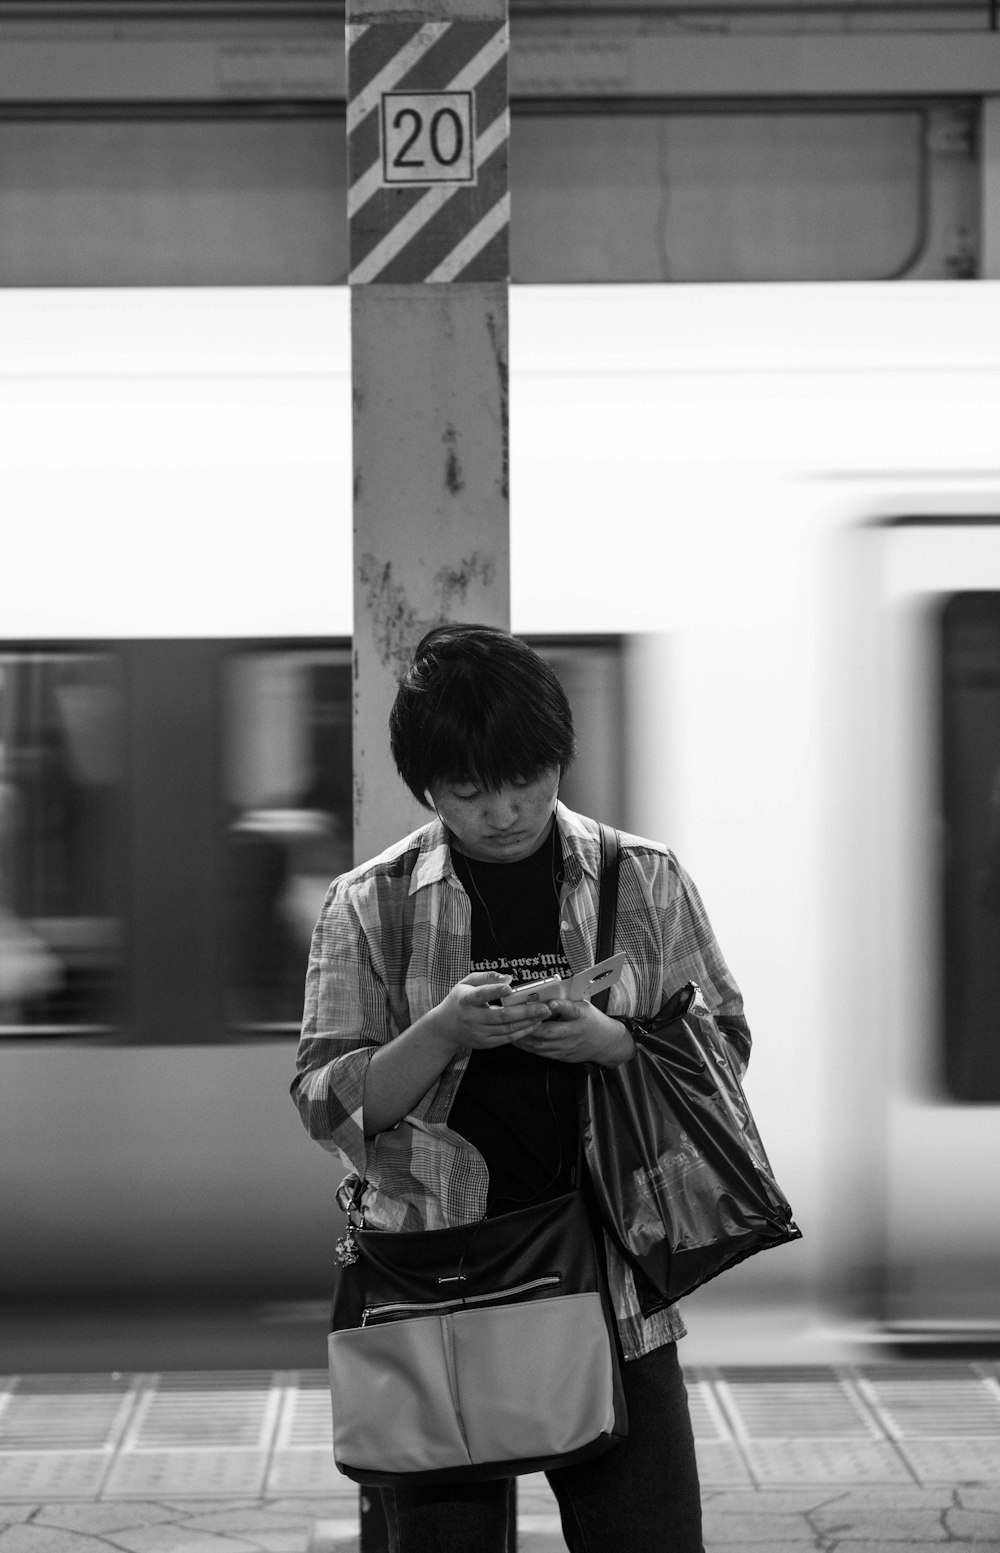 grayscale photography of man using phone while standing